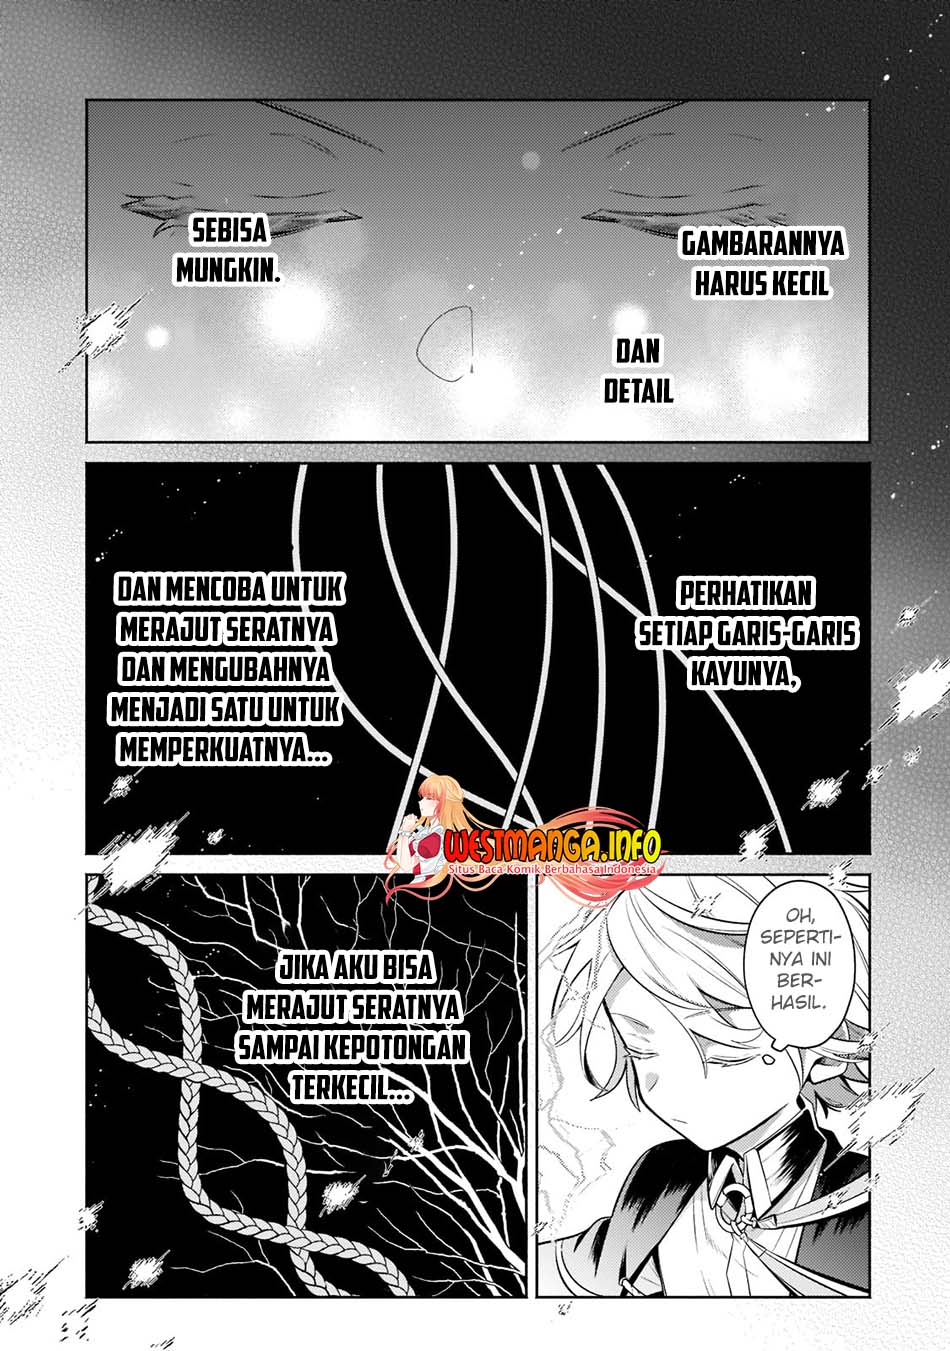 Fun Territory Defense Of The Easy-Going Lord ~The Nameless Village Is Made Into The Strongest Fortified City By Production Magic~ Chapter 08 - 189